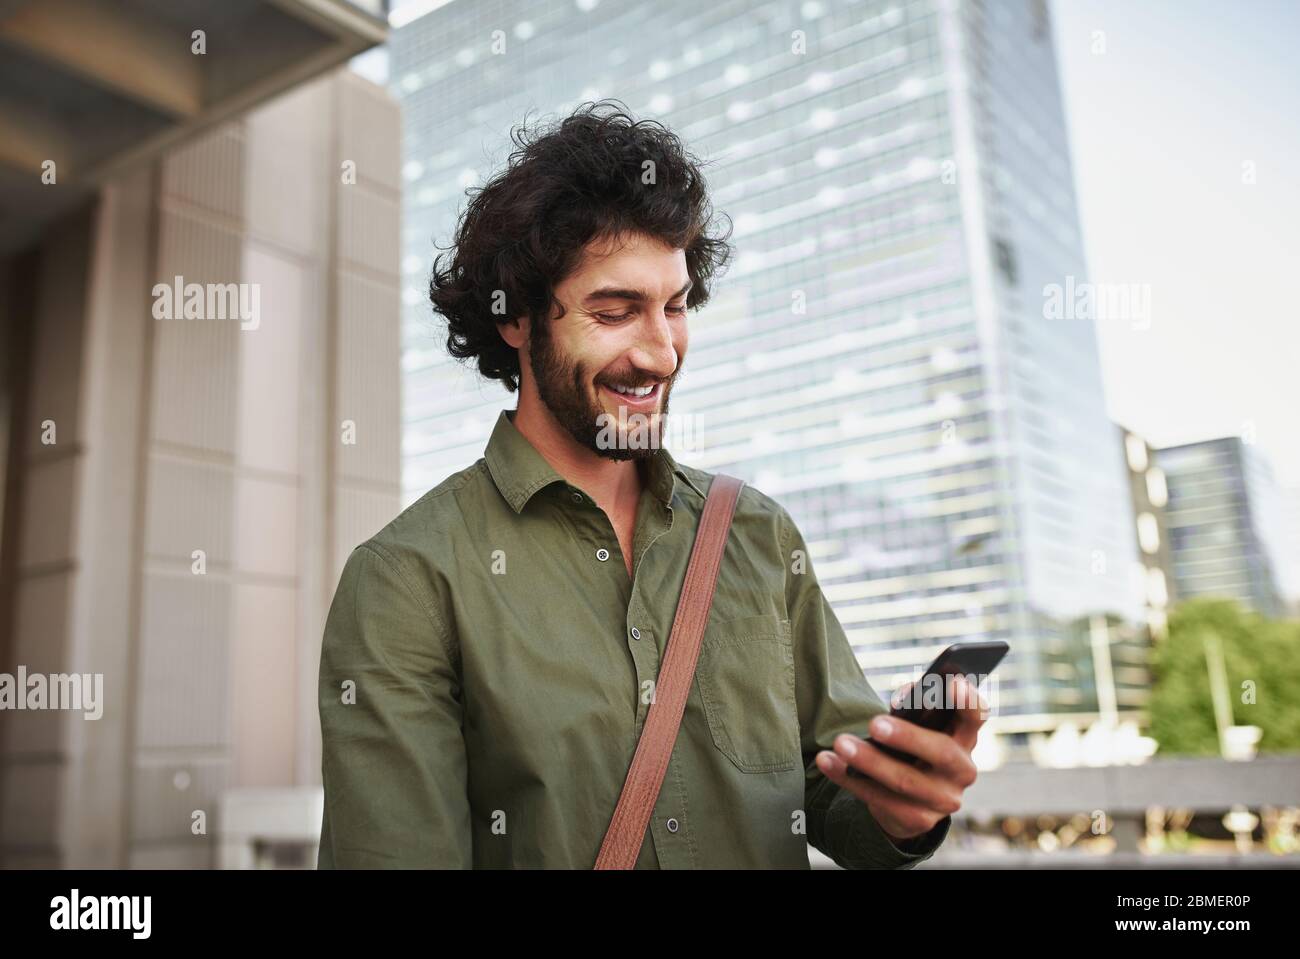 Handsome smiling young man in formal clothing using smartphone Stock Photo